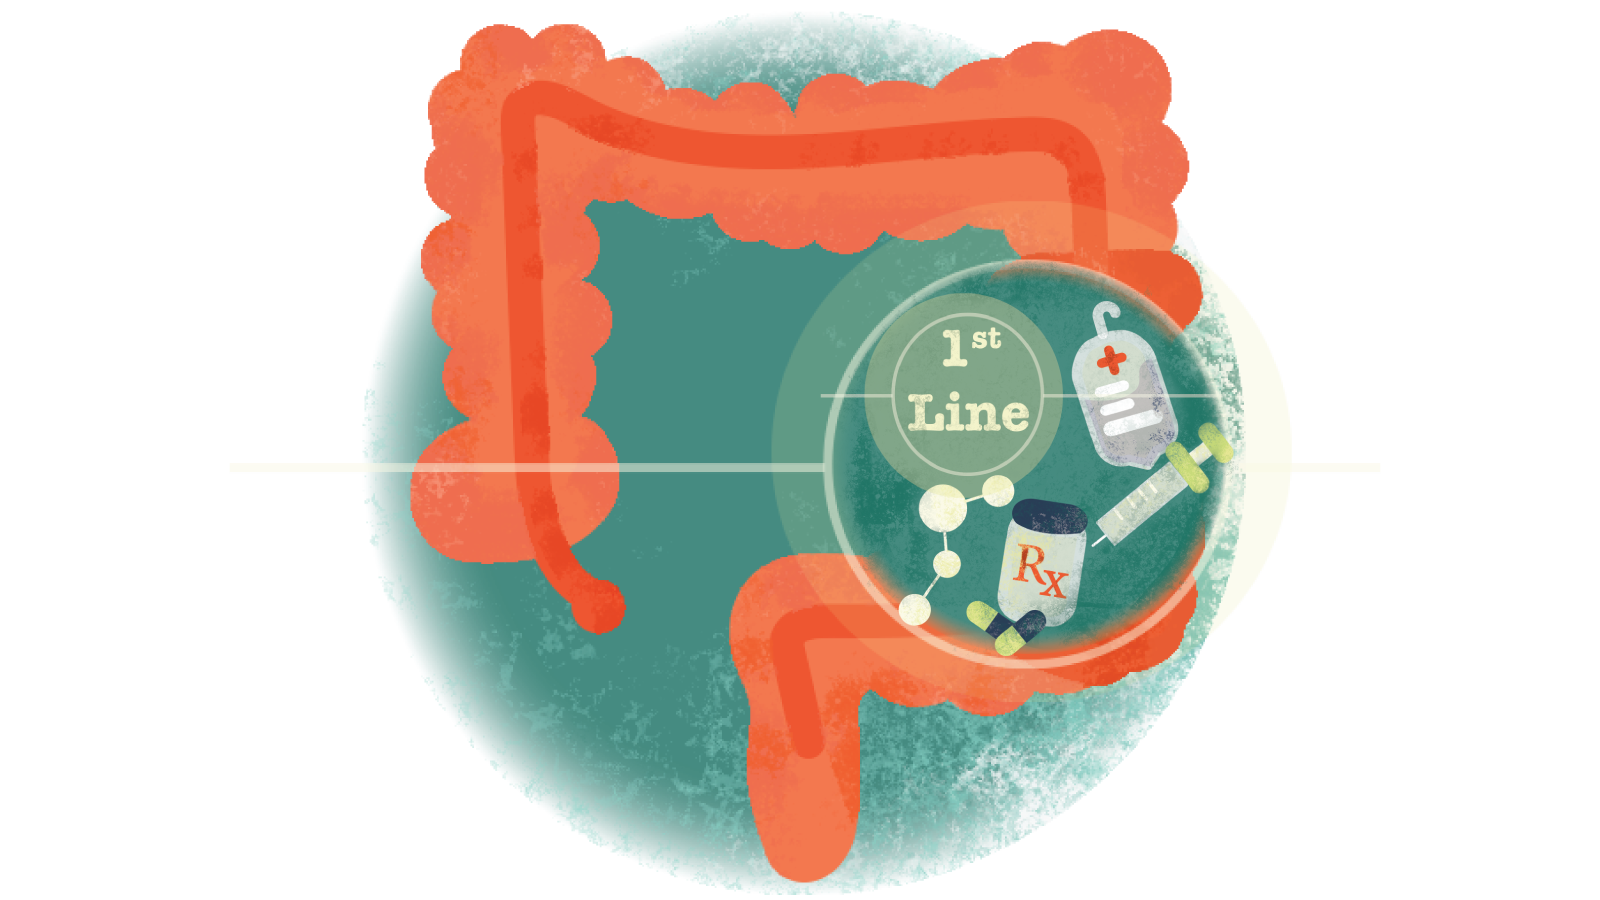 Illustration of pills, syringe, IV bag with text 1st in a circle over a colon with ulcerative colitis 